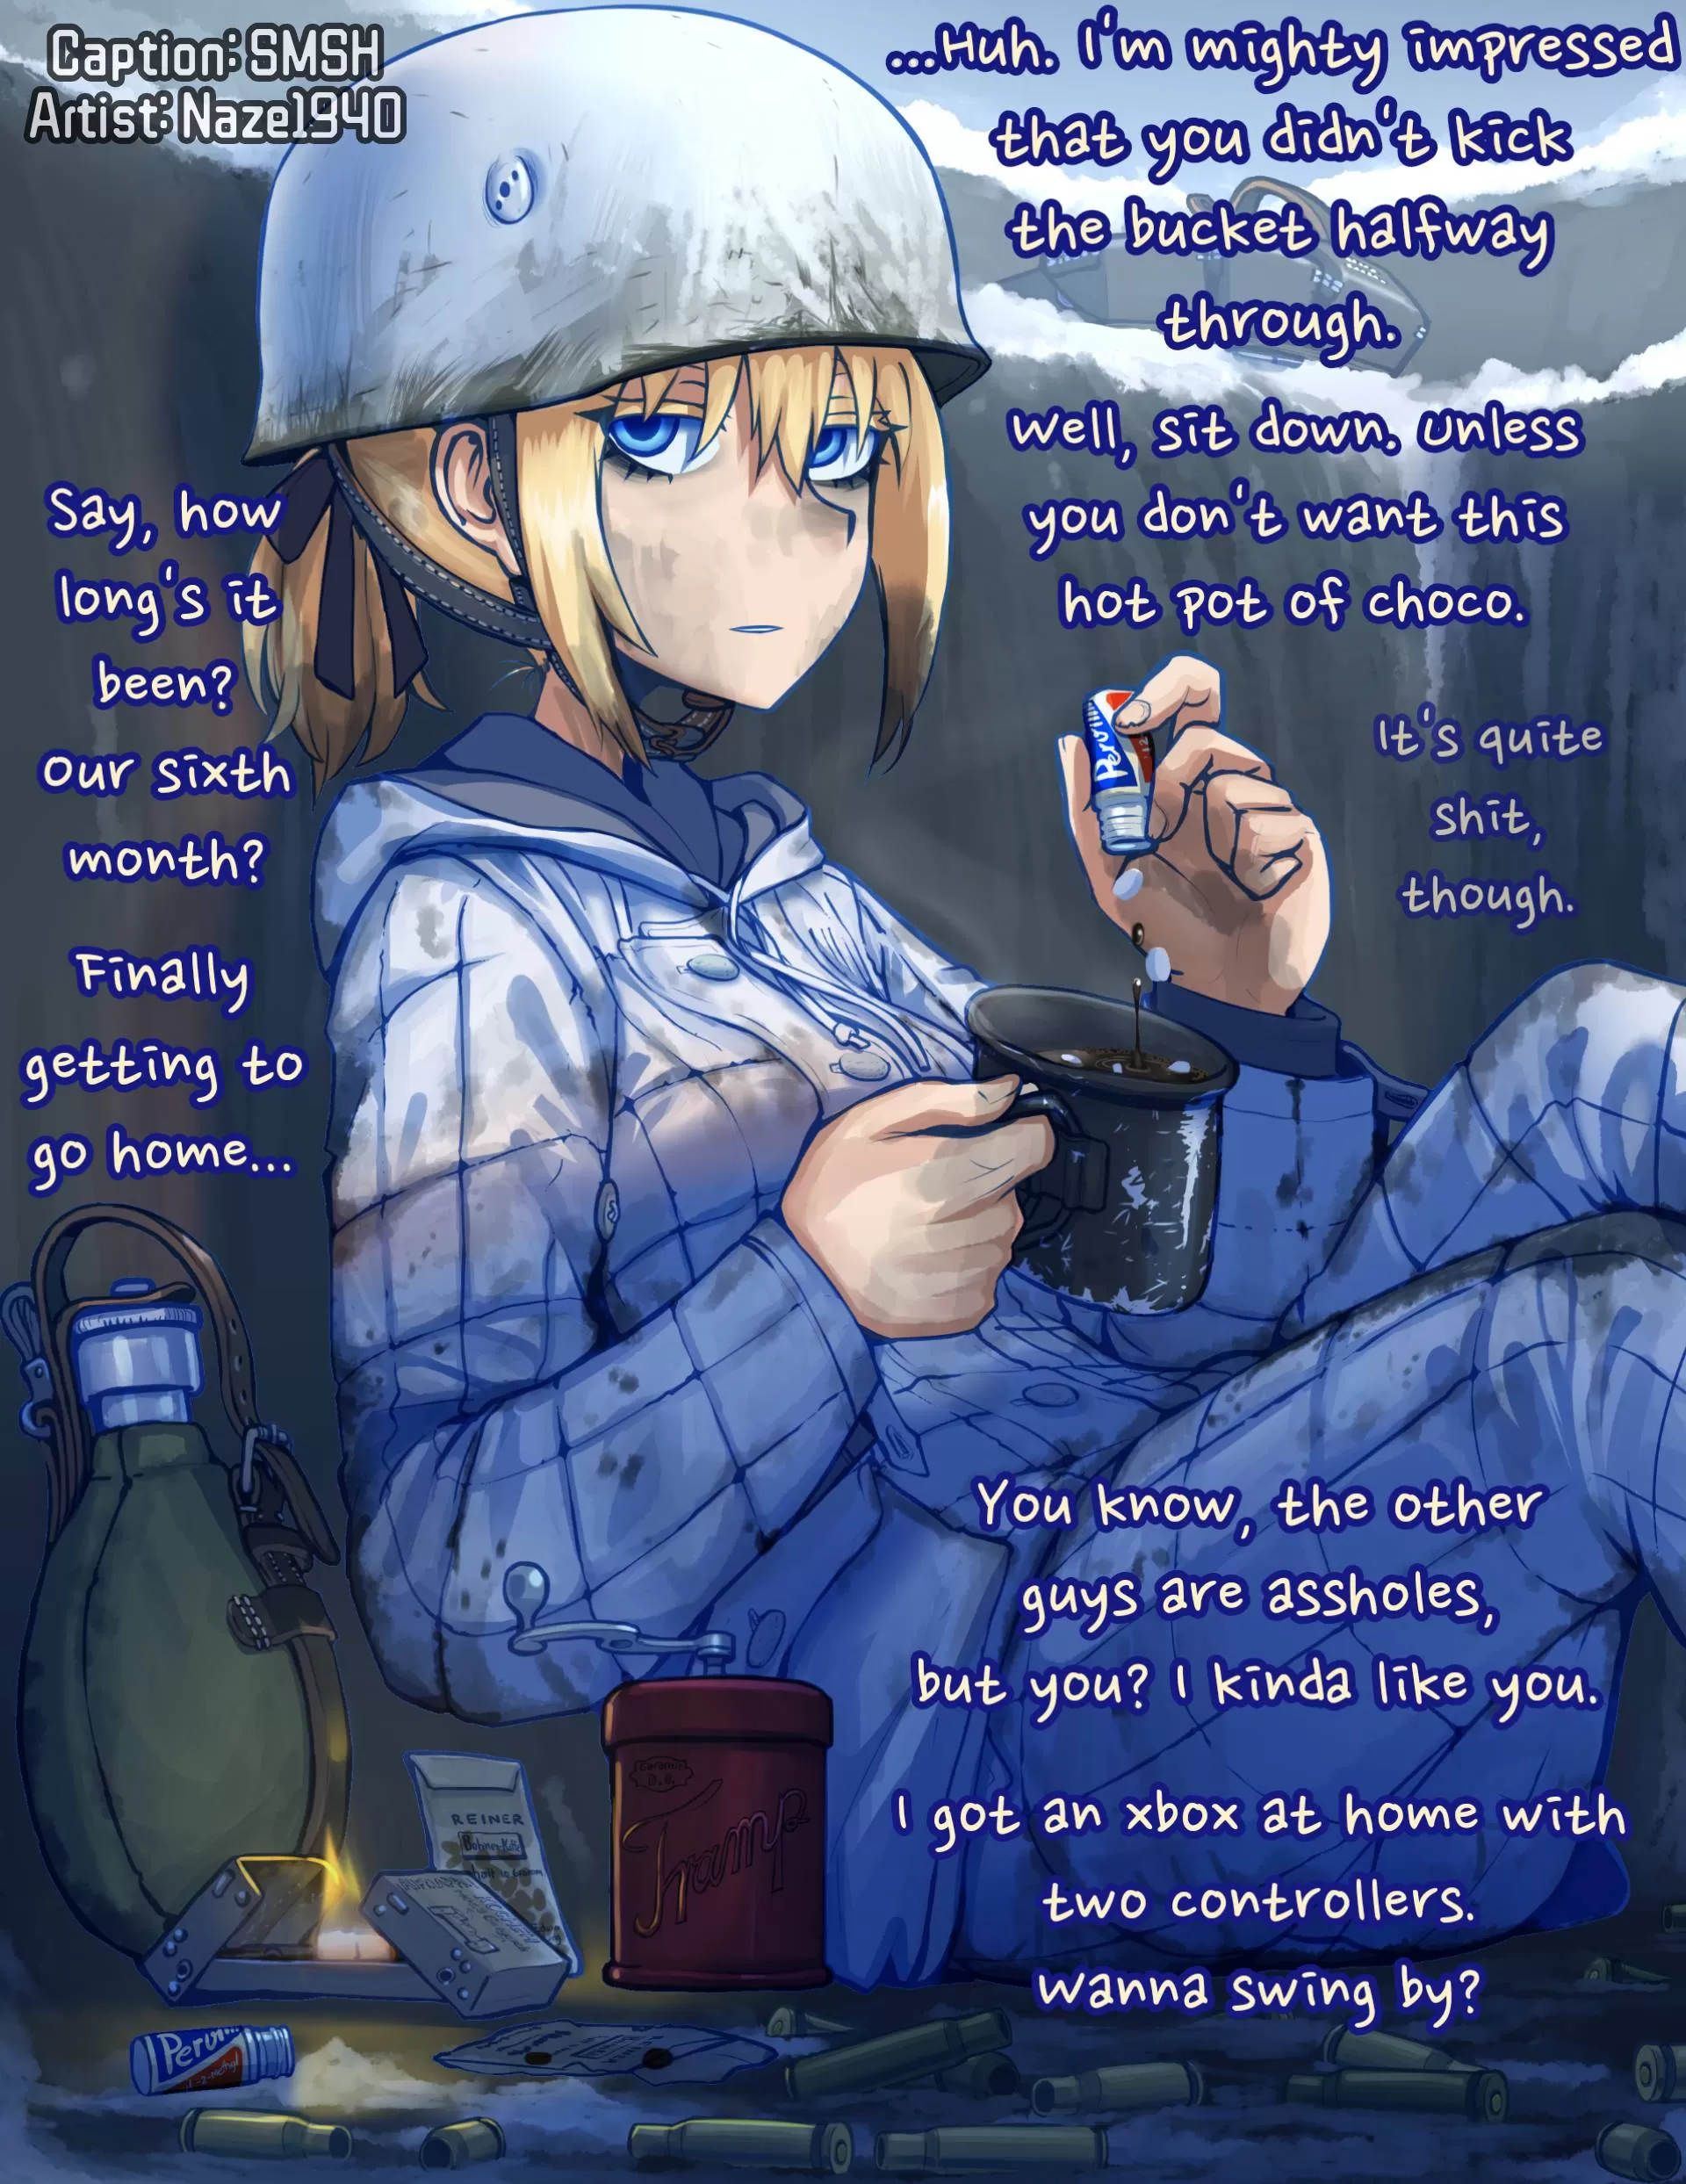 1920px x 2487px - Sup. Didn't die? [Military] [Getting To Go Home] [Banter] [Confession (?)] [ Hot Chocolate] [Shitpost] nudes : hentaicaptions | NUDE-PICS.ORG